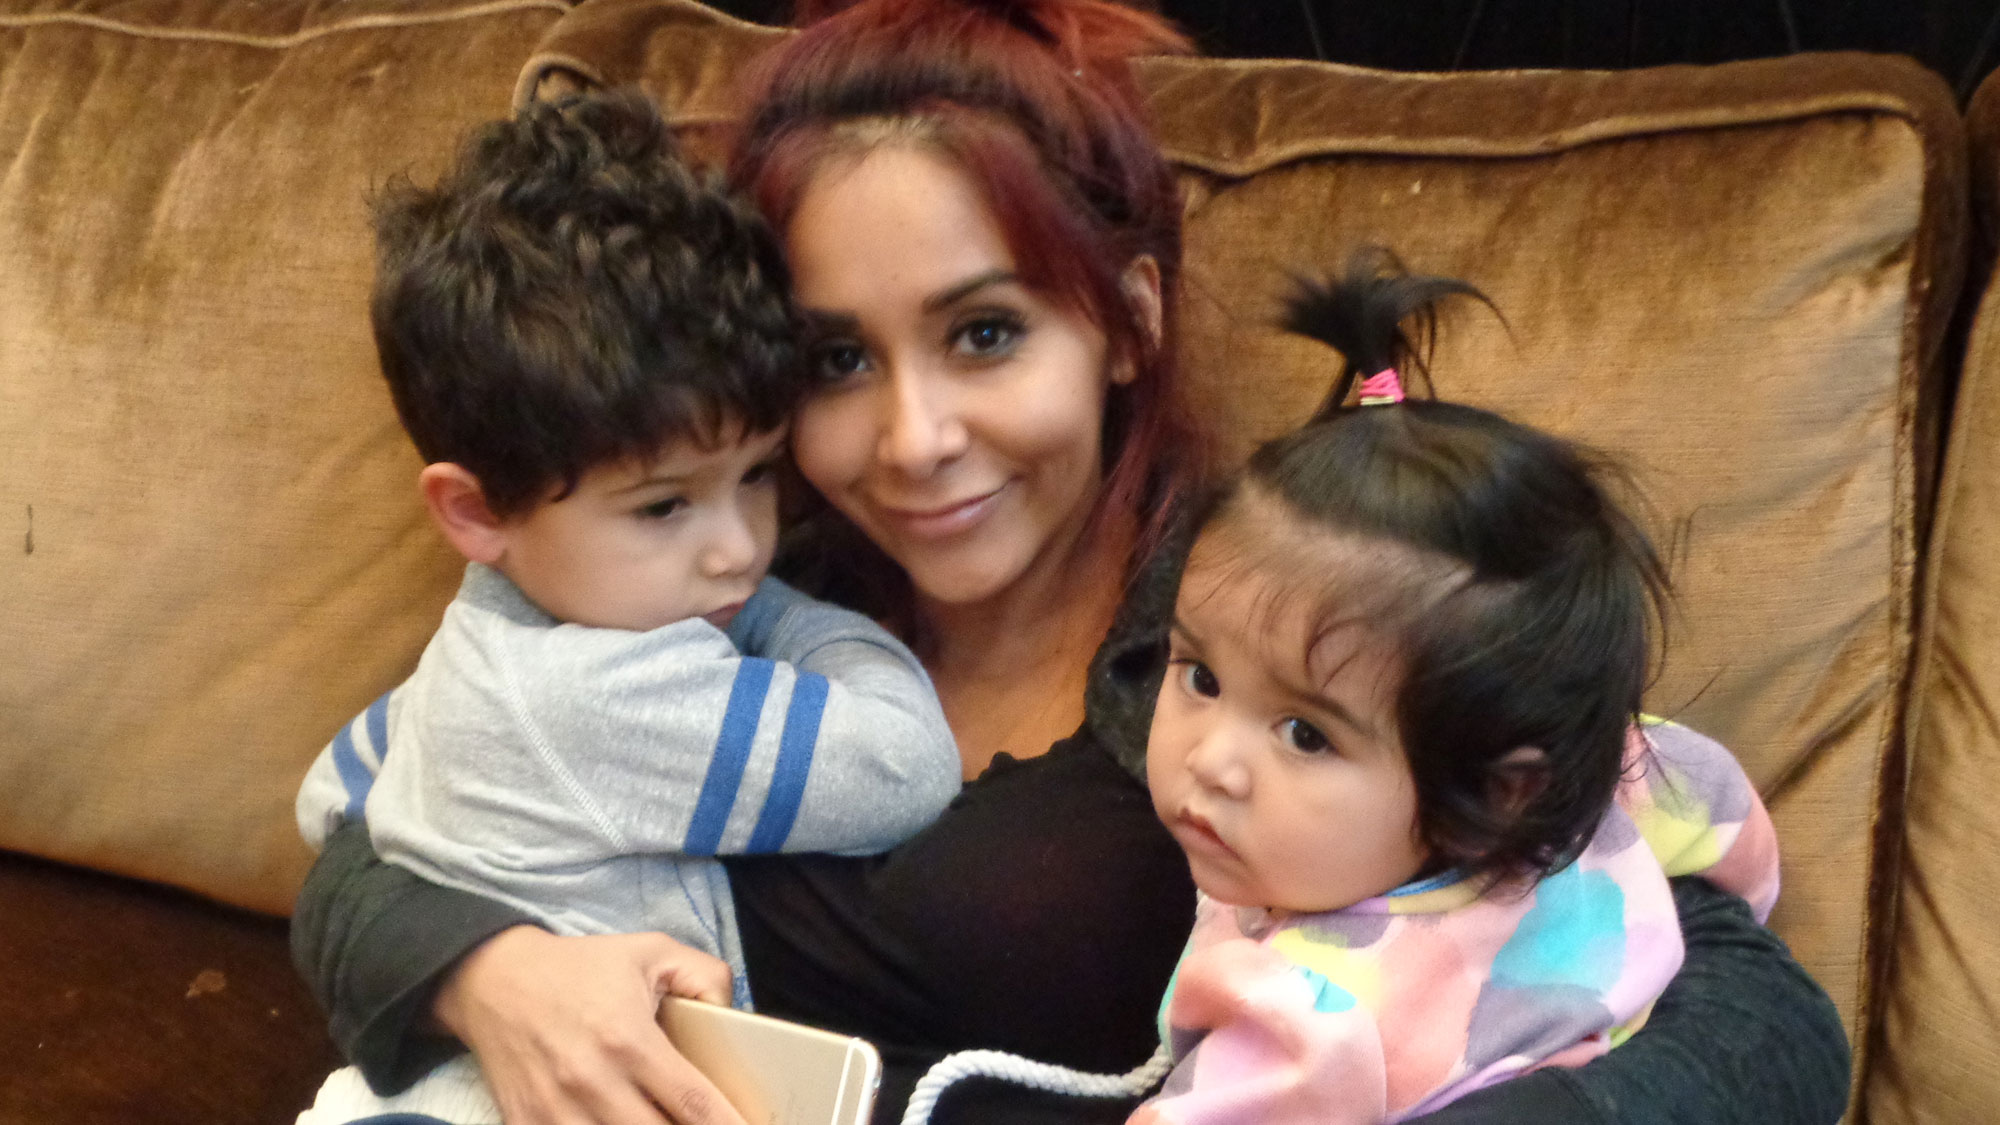 Snooki Shares How To Be a Boss Lady and Kick-Ass Mom